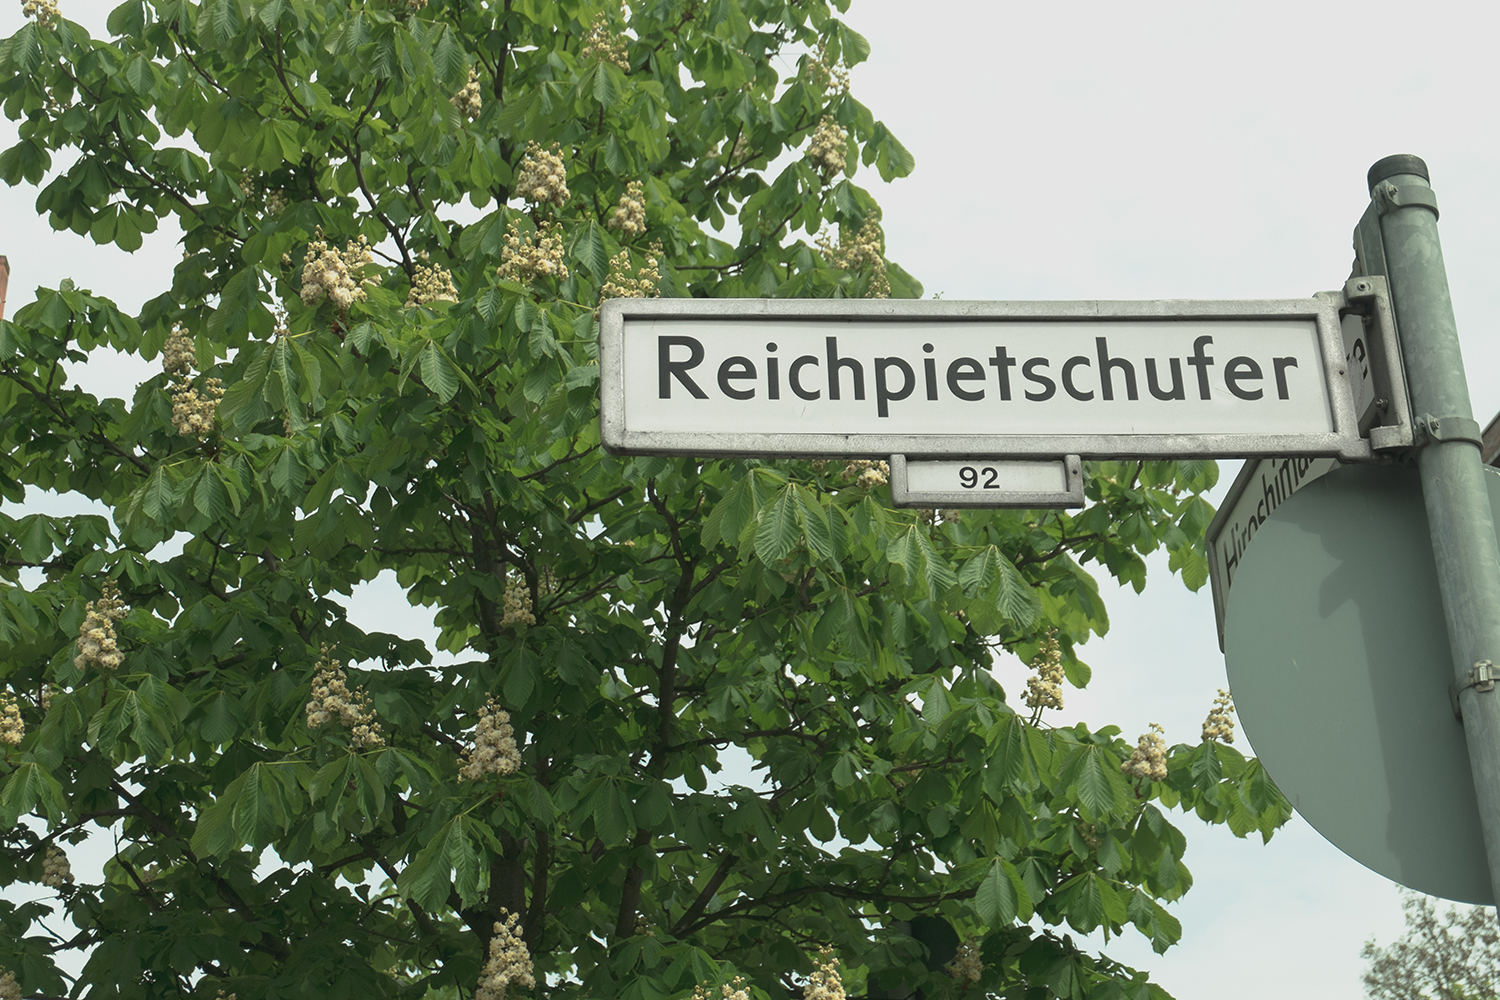 Street sign saying ‘Reichpietschufer’ in front of a chestnut tree